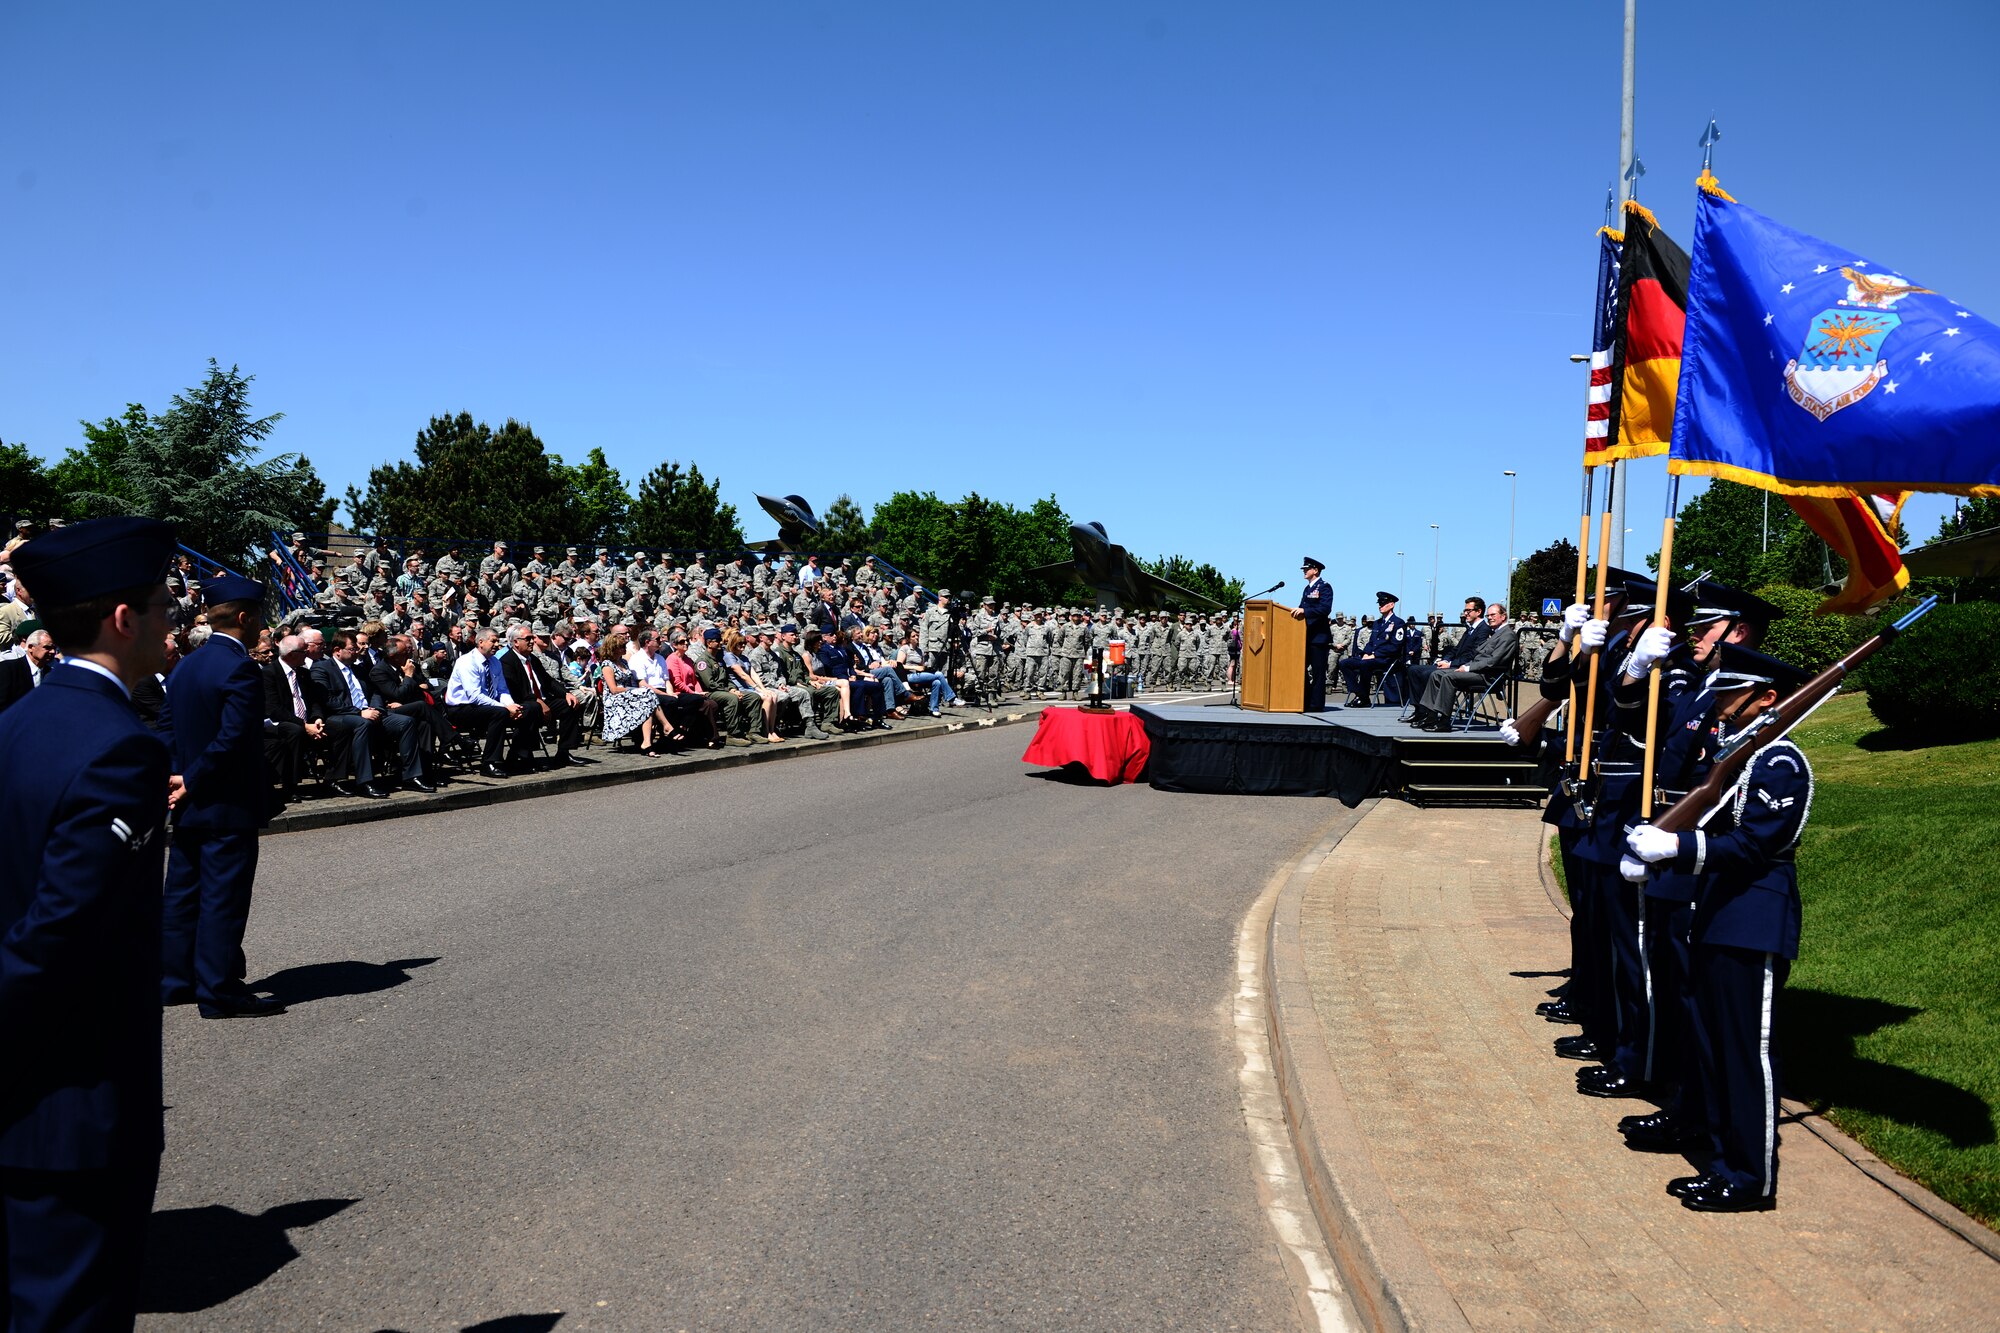 SPANGDAHLEM AIR BASE, Germany – Col. Chris Weggeman, 52nd Fighter Wing commander, speaks during the 9/11 memorial dedication and wreath-laying ceremony here May 25. The 9/11 memorial was donated to the 52nd FW by the Host Nation Council Spangdahlem and local businesses.  The sculpture was designed by Hubert Kruft, artist, from Niederpruem. (U.S. Air Force photo by Airman 1st Class Matthew B. Fredericks/Released)